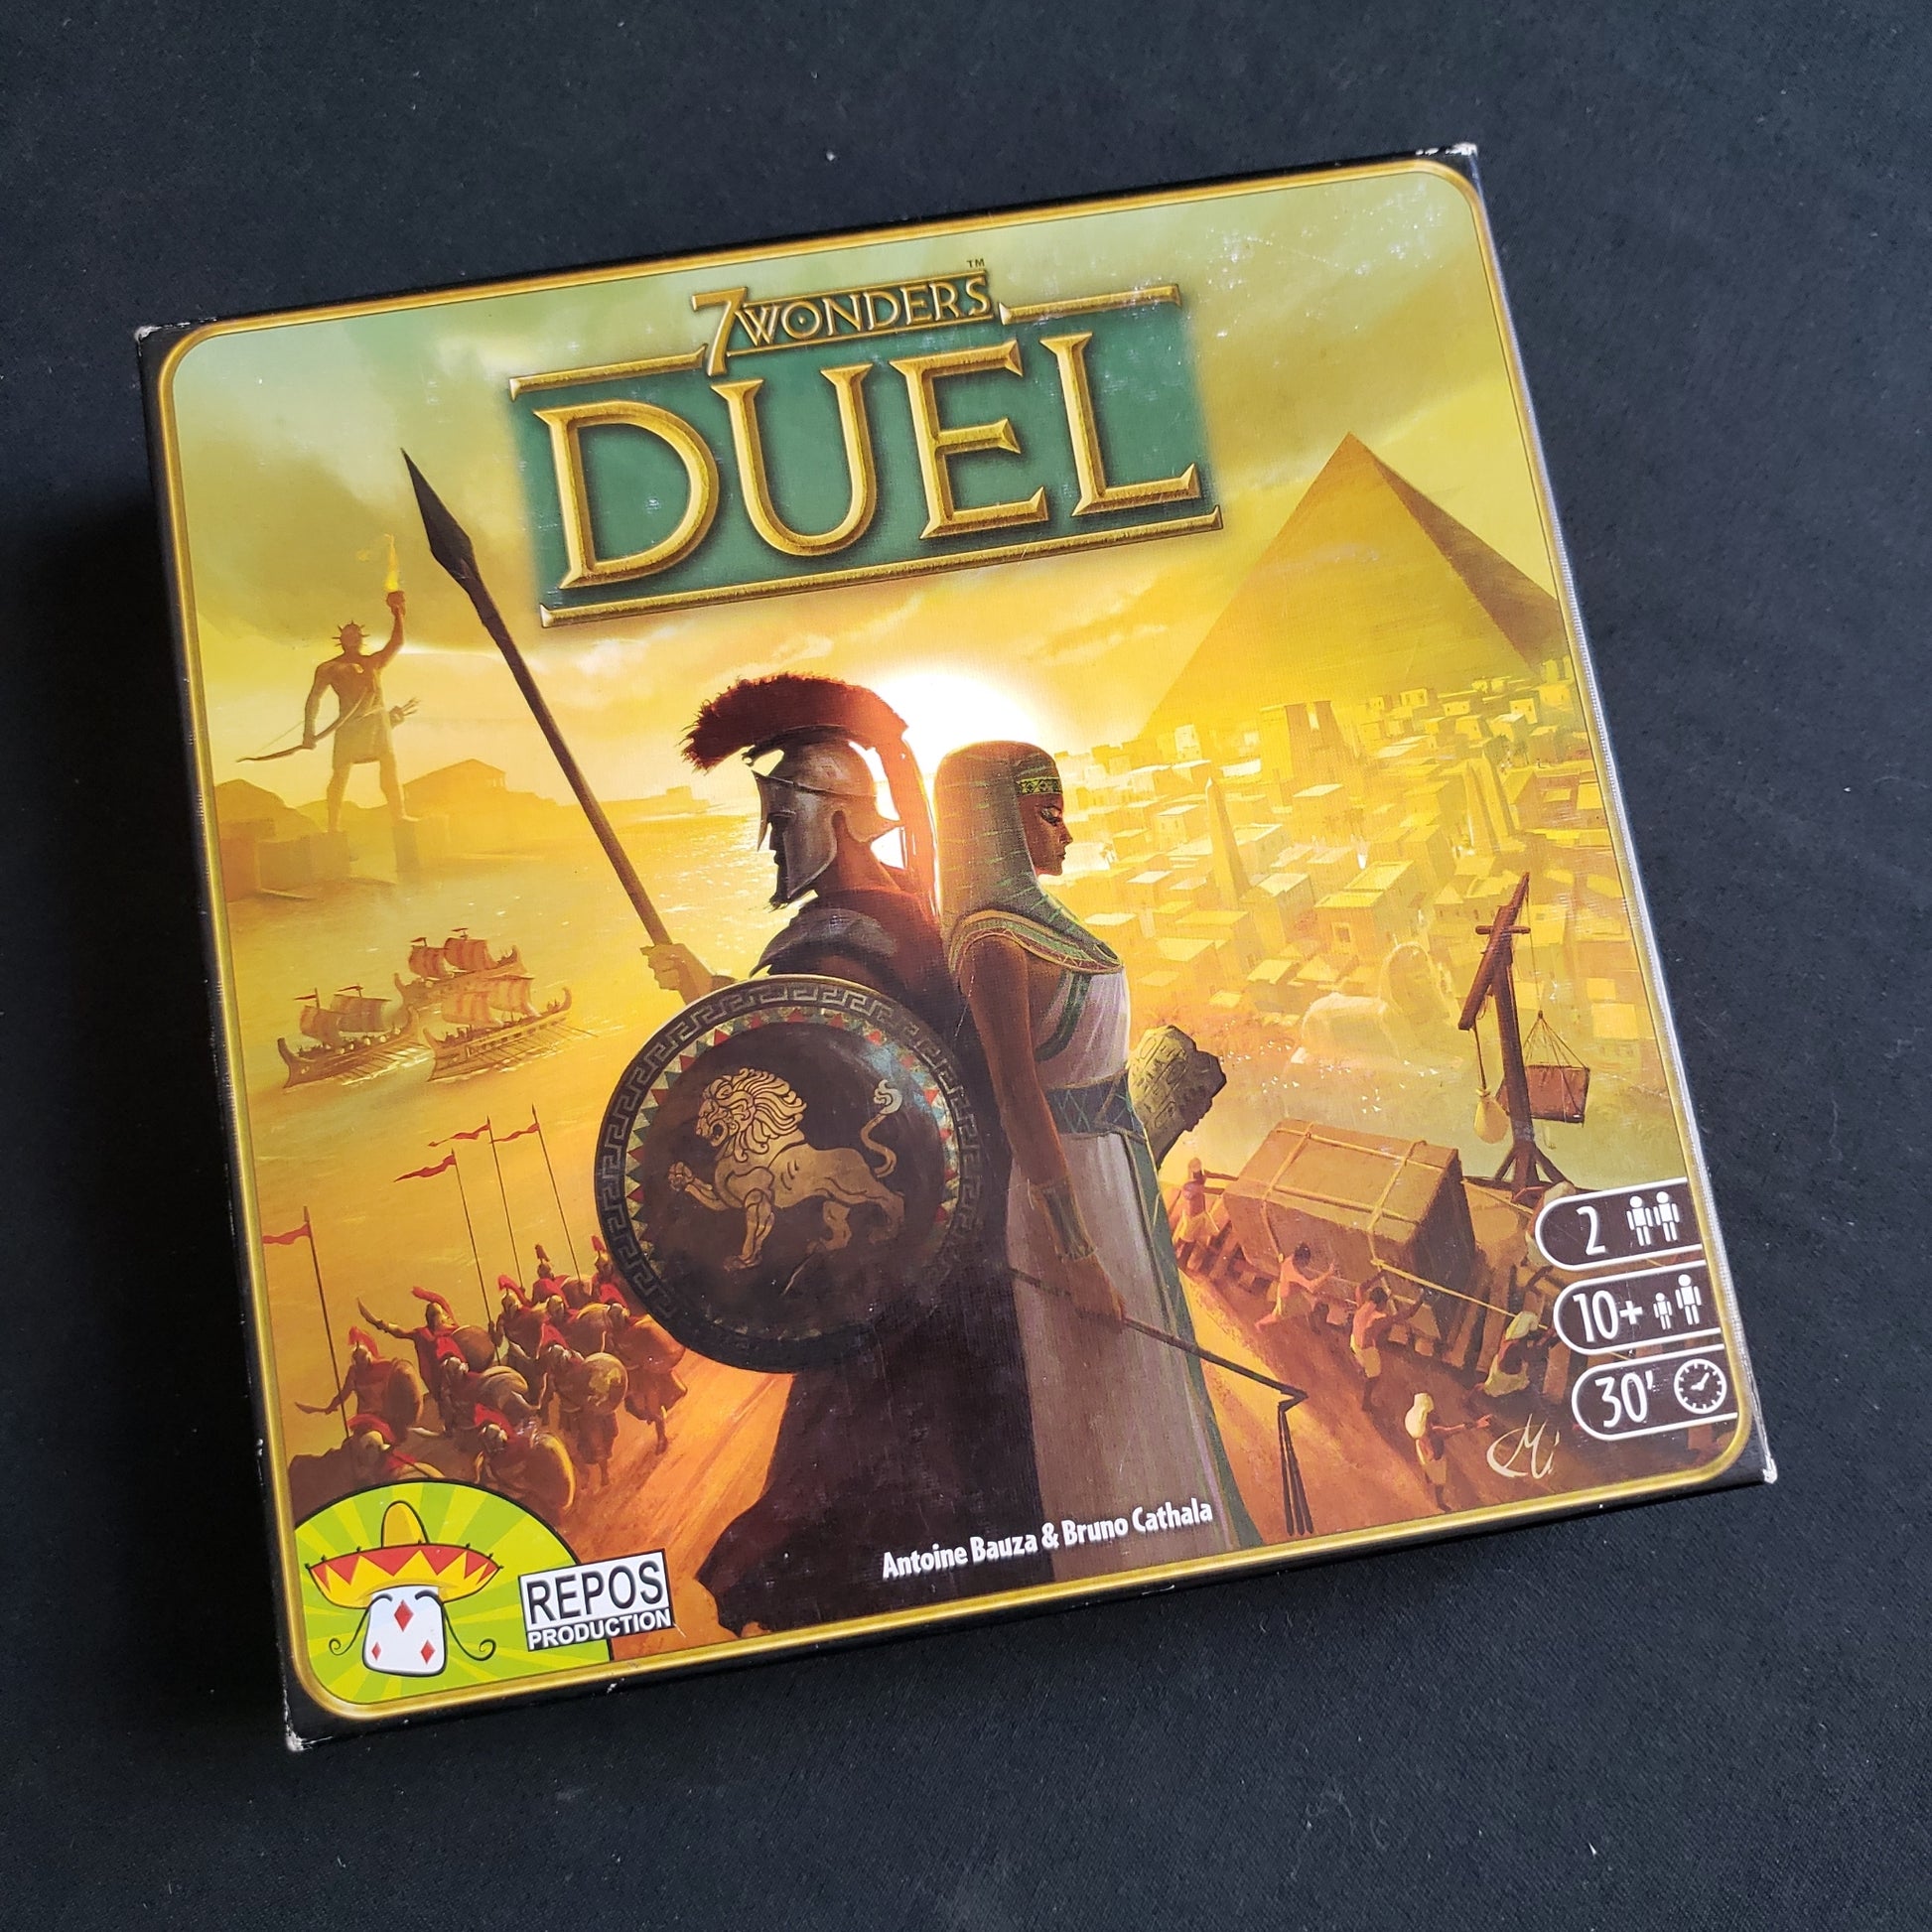 Image shows the front cover of the box of the 7 Wonders Duel board game